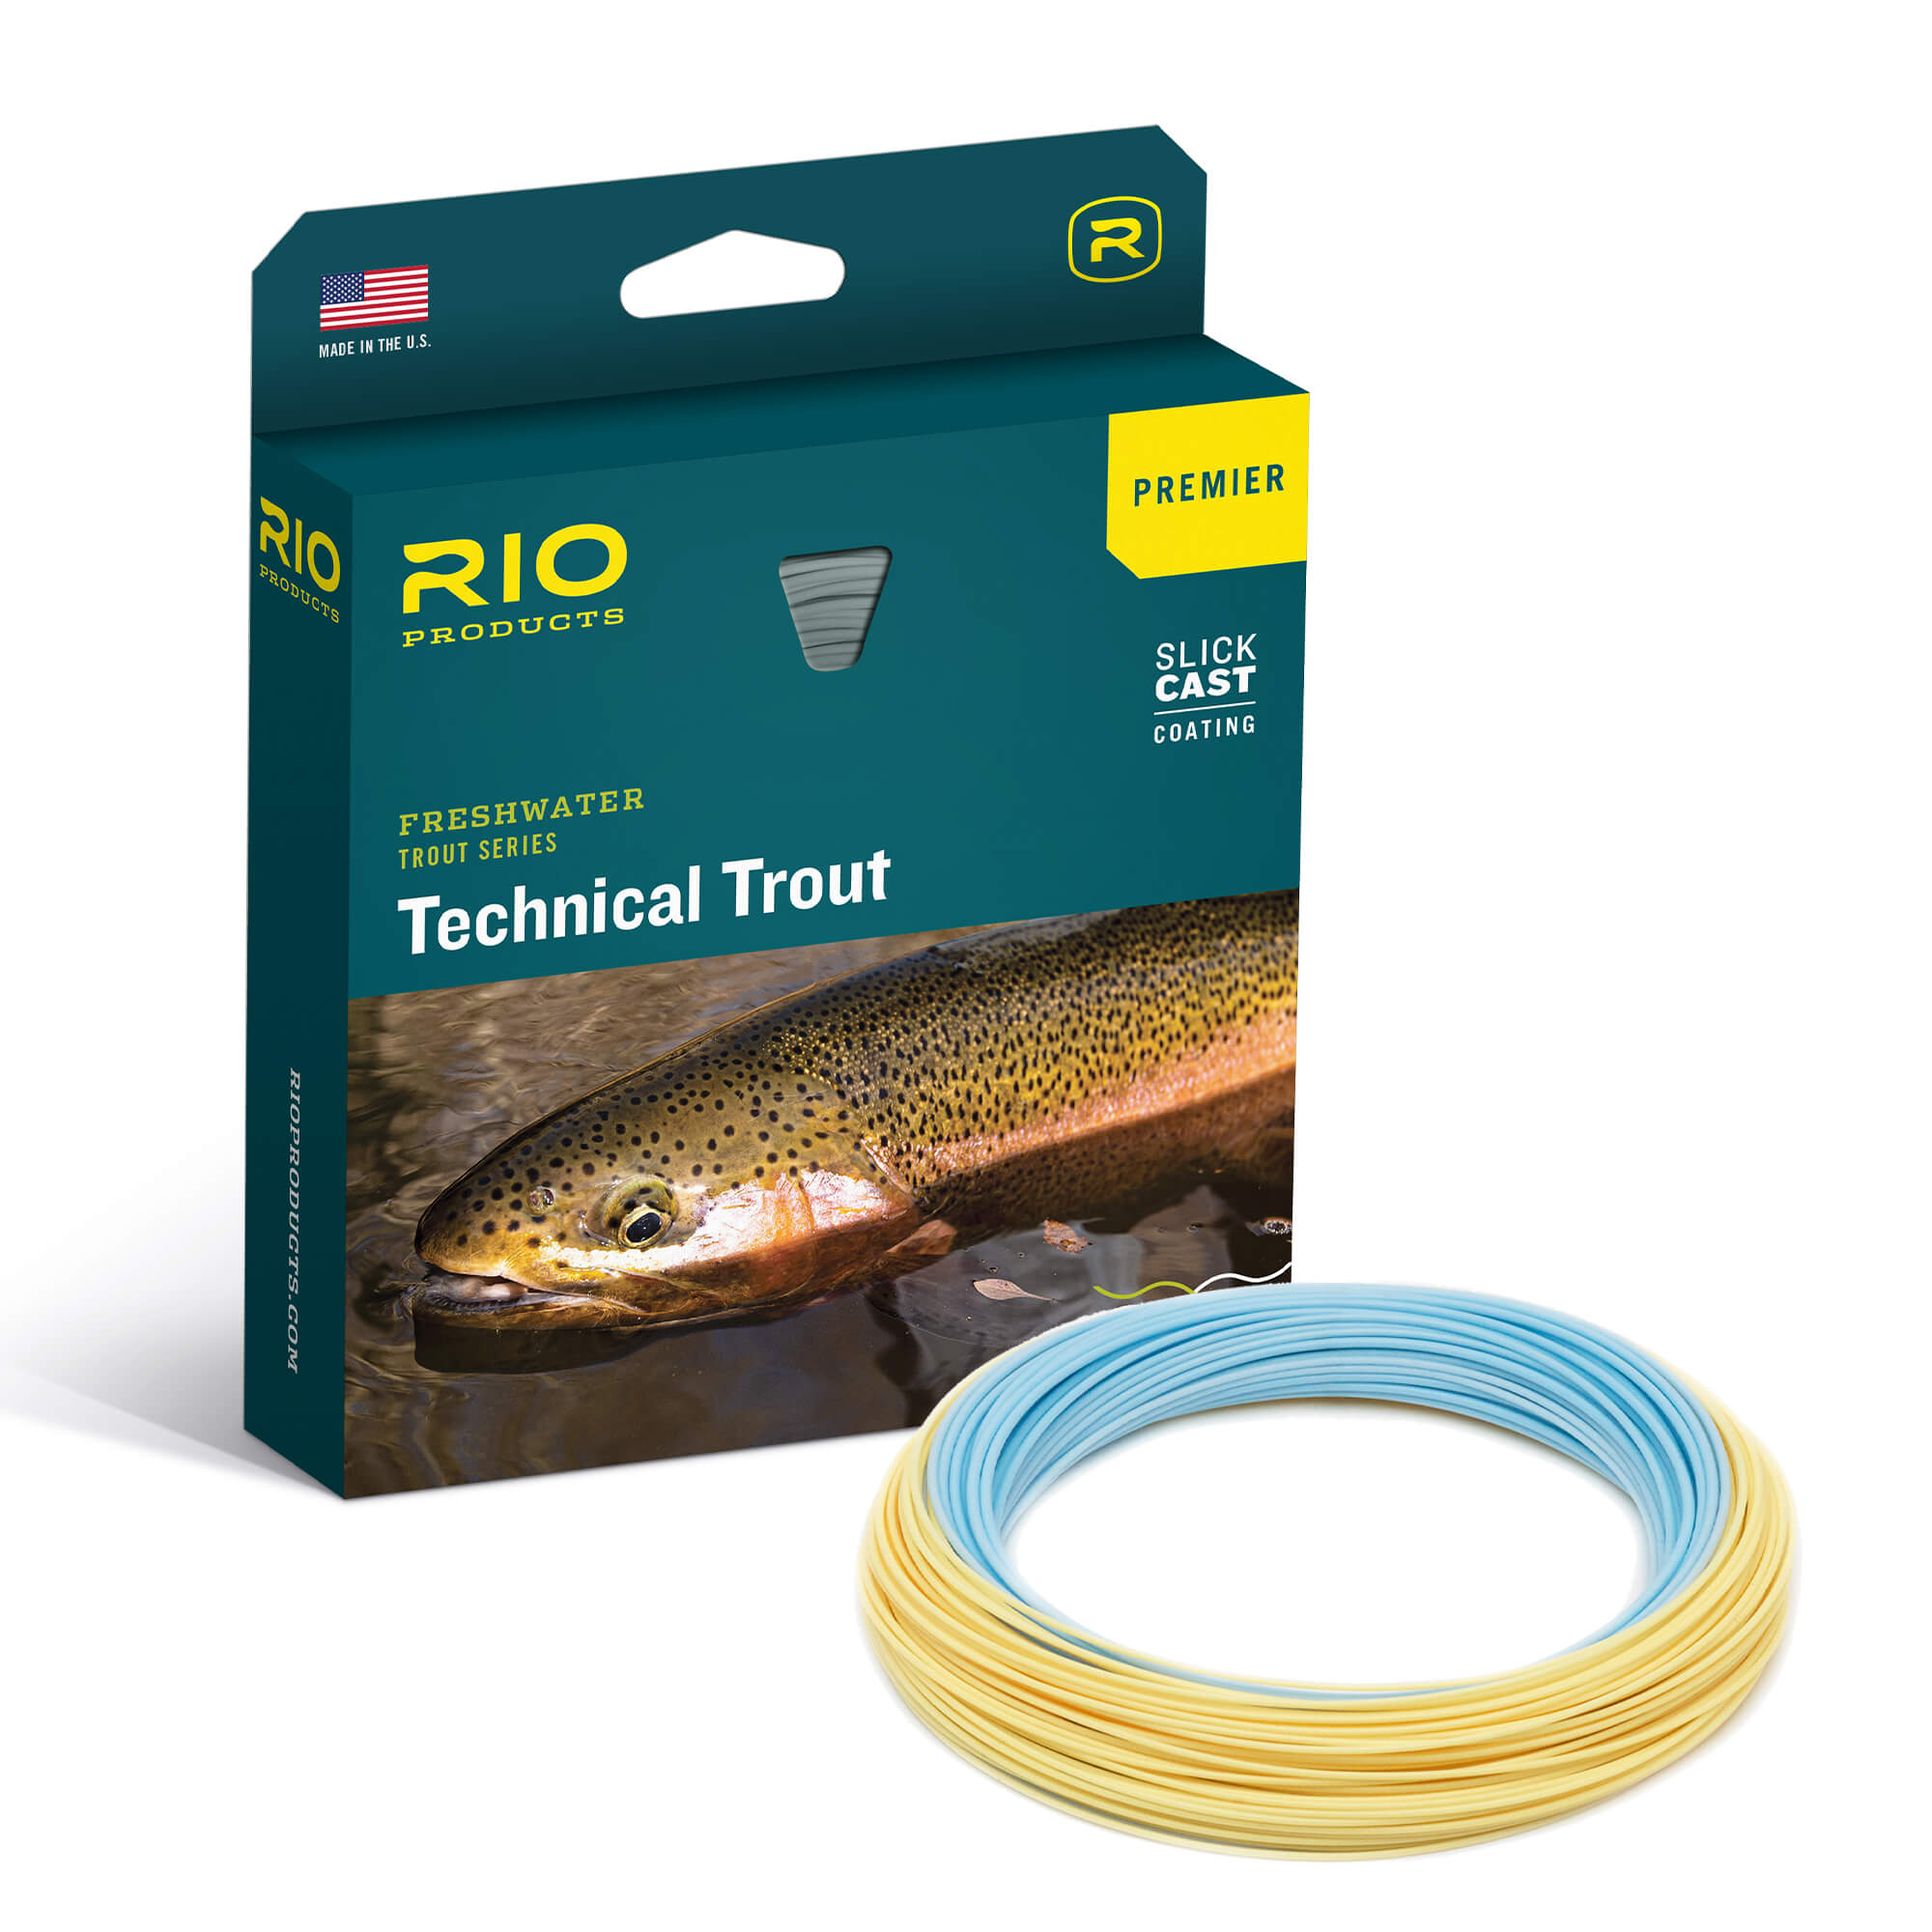 RIO Premier Technical Trout Fly Line – Guide Flyfishing, Fly Fishing Rods,  Reels, Sage, Redington, RIO